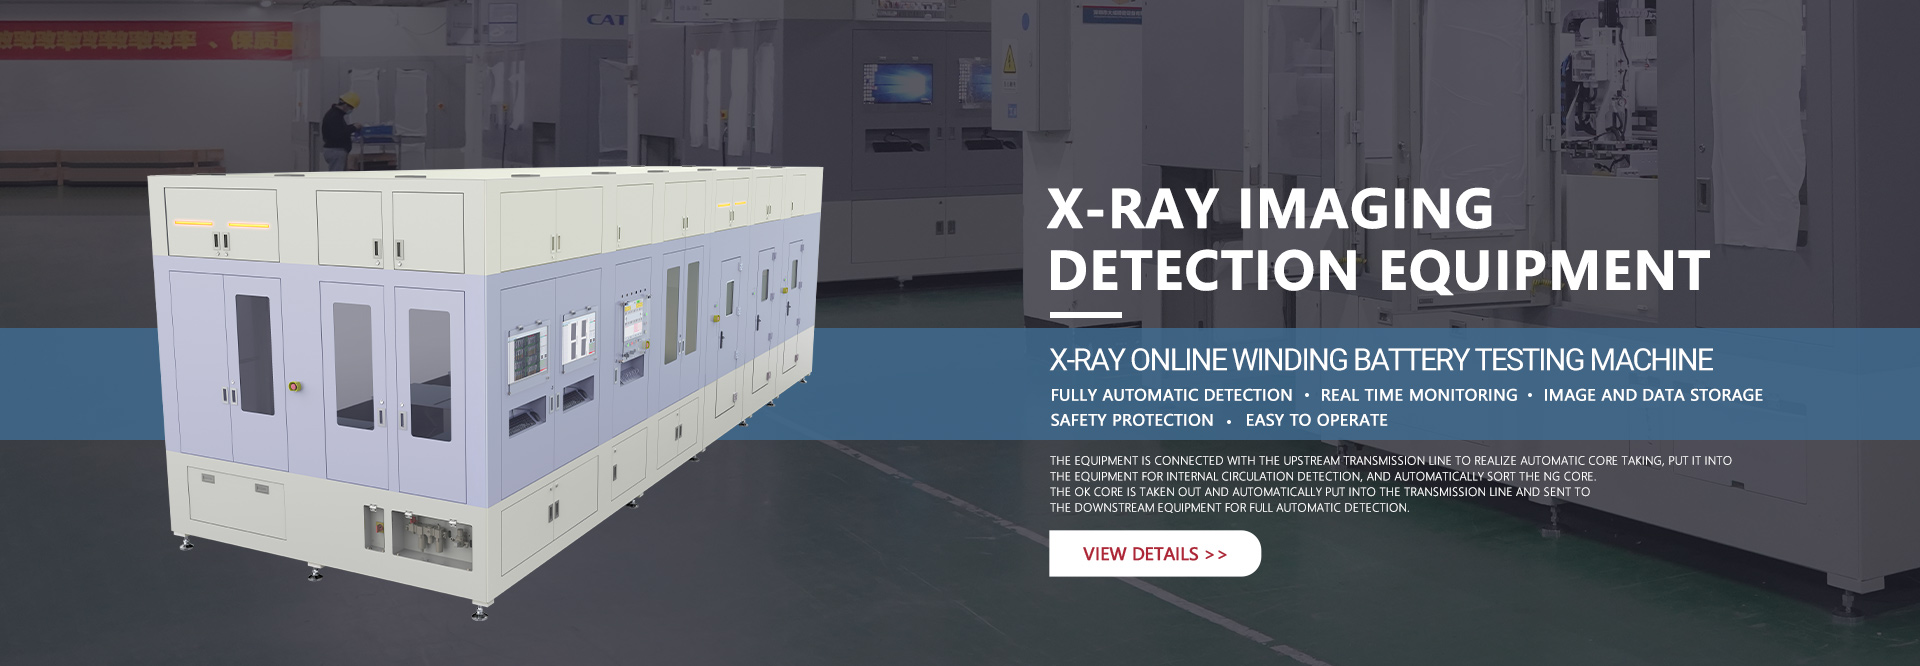 X-ray four-station rotary table machine